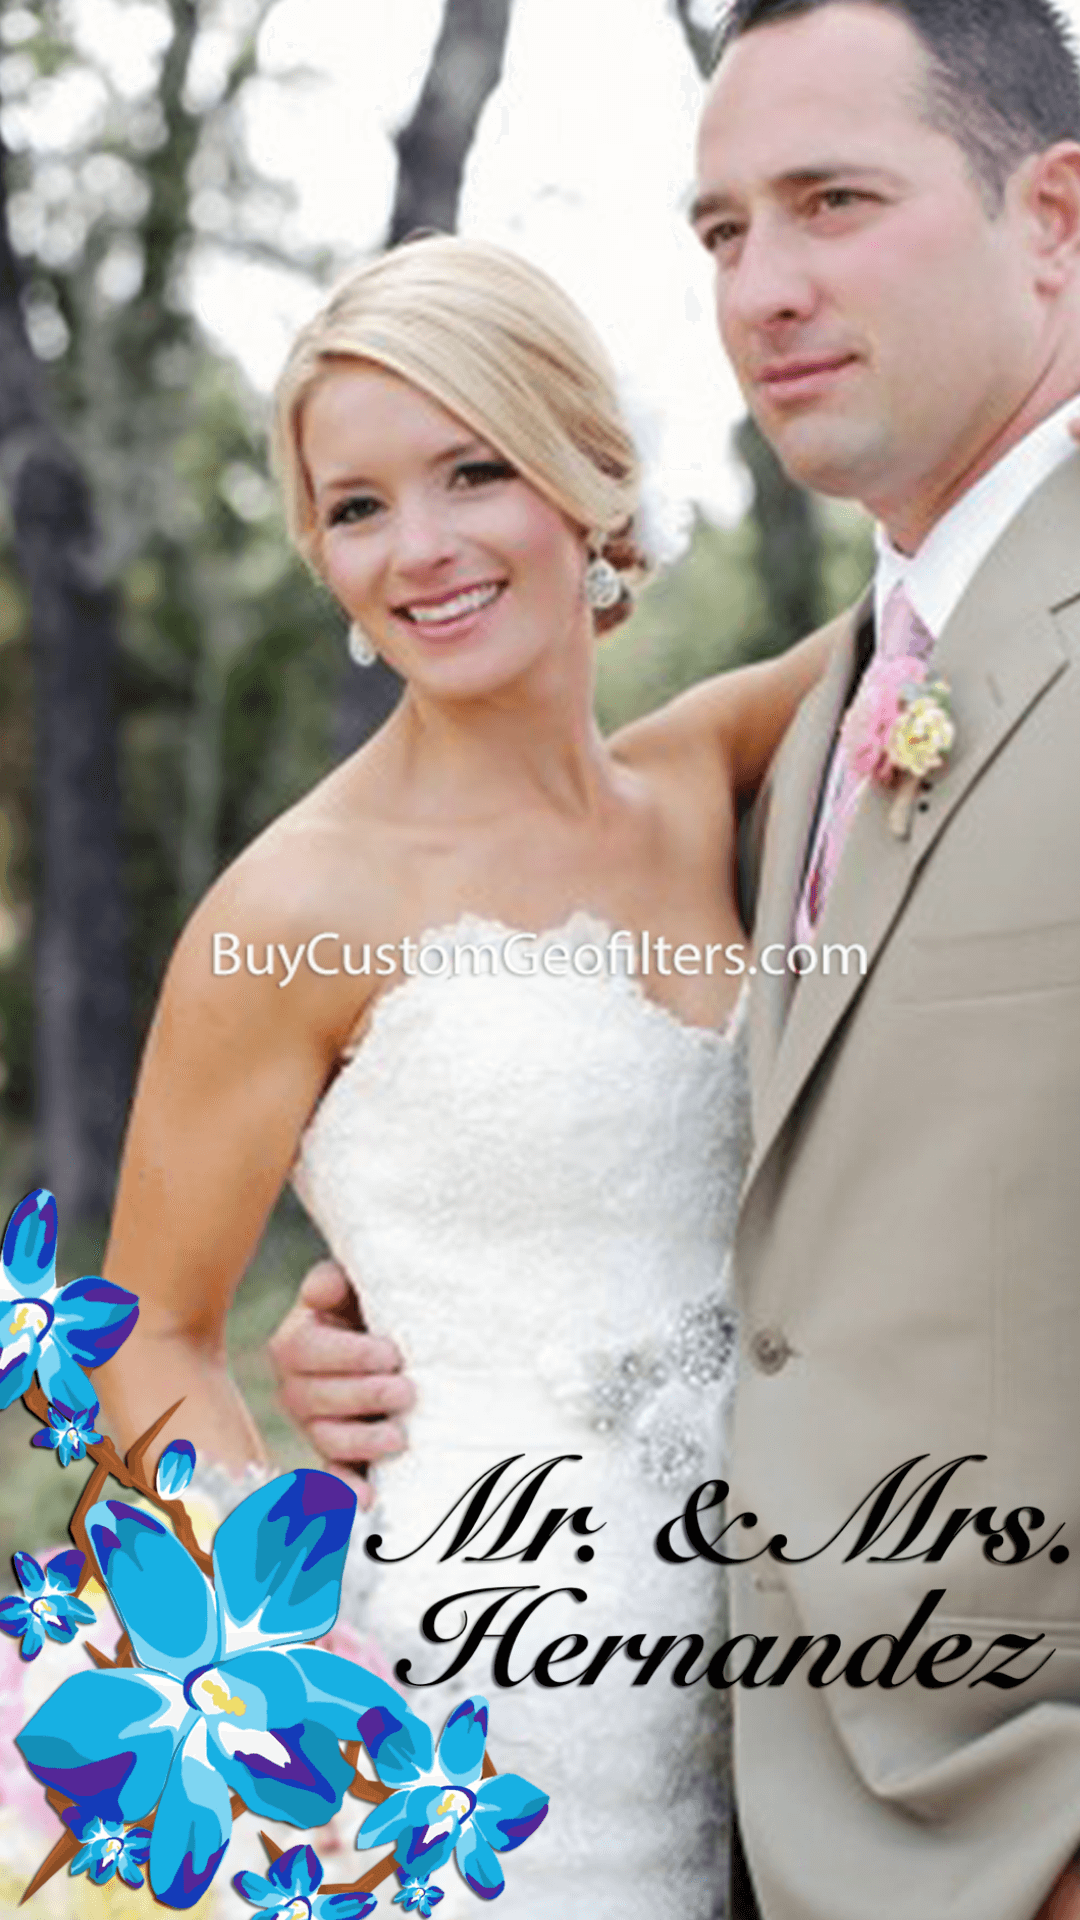 snapchat-wedding-geofilters-for-mr-and-mrs-hernandez-wedding.png